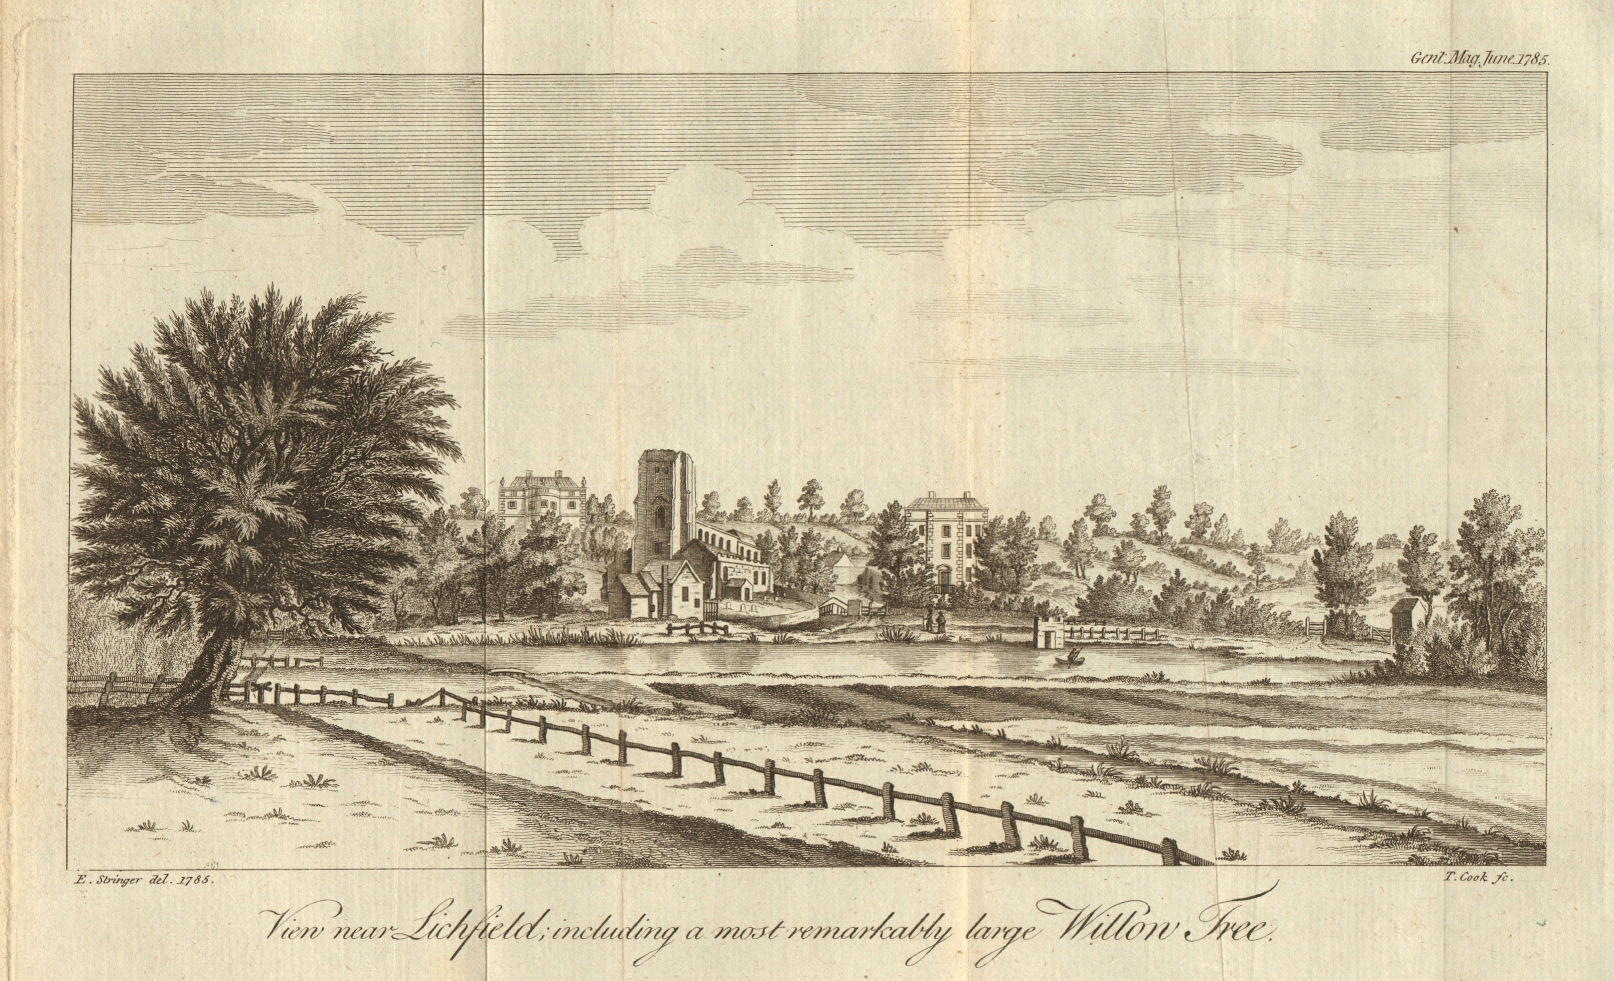 Associate Product View near Lichfield, Staffordshire, including a large willow tree 1785 print